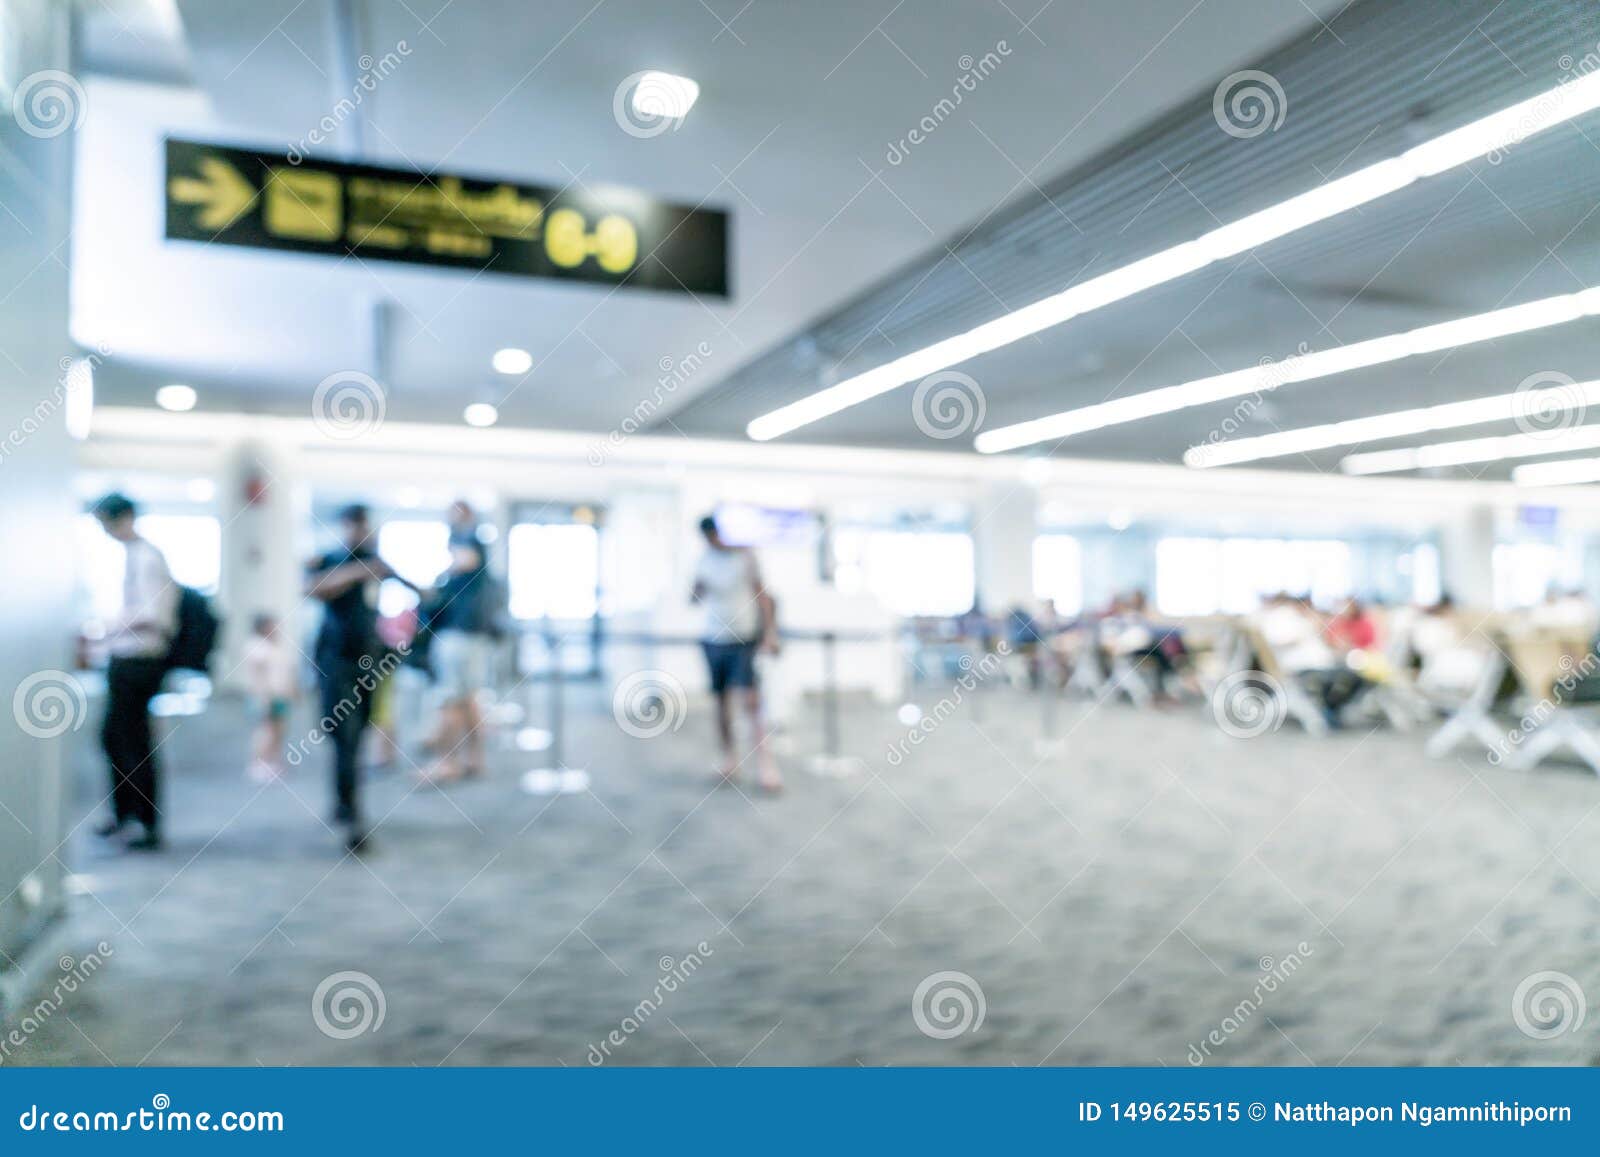 Abstract Blur Airport for Background Stock Image - Image of blur